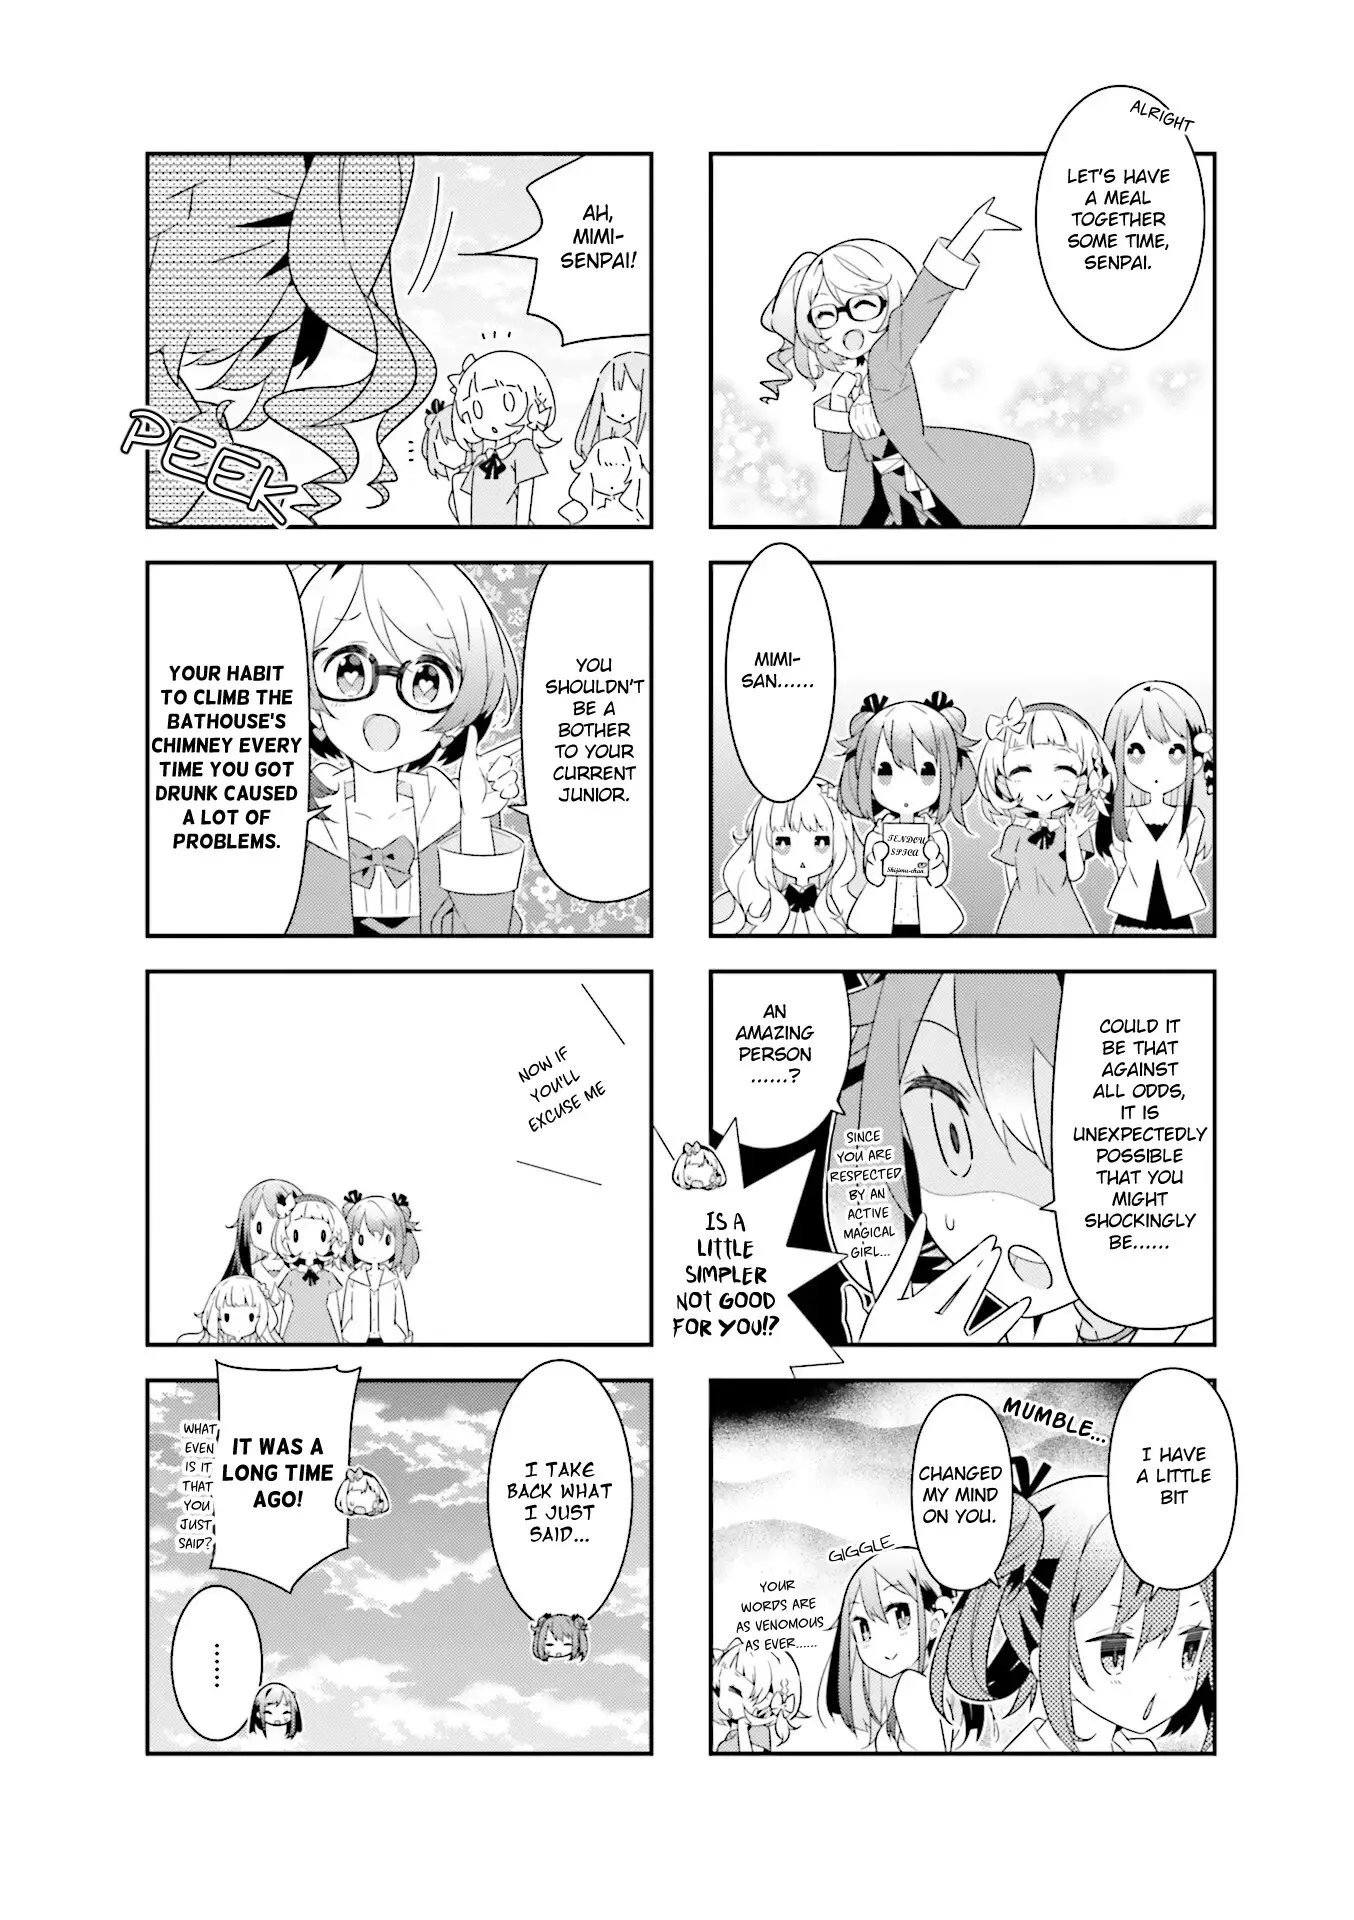 The Life After Retirement Of Magical Girls - 14 page 8-0421523a